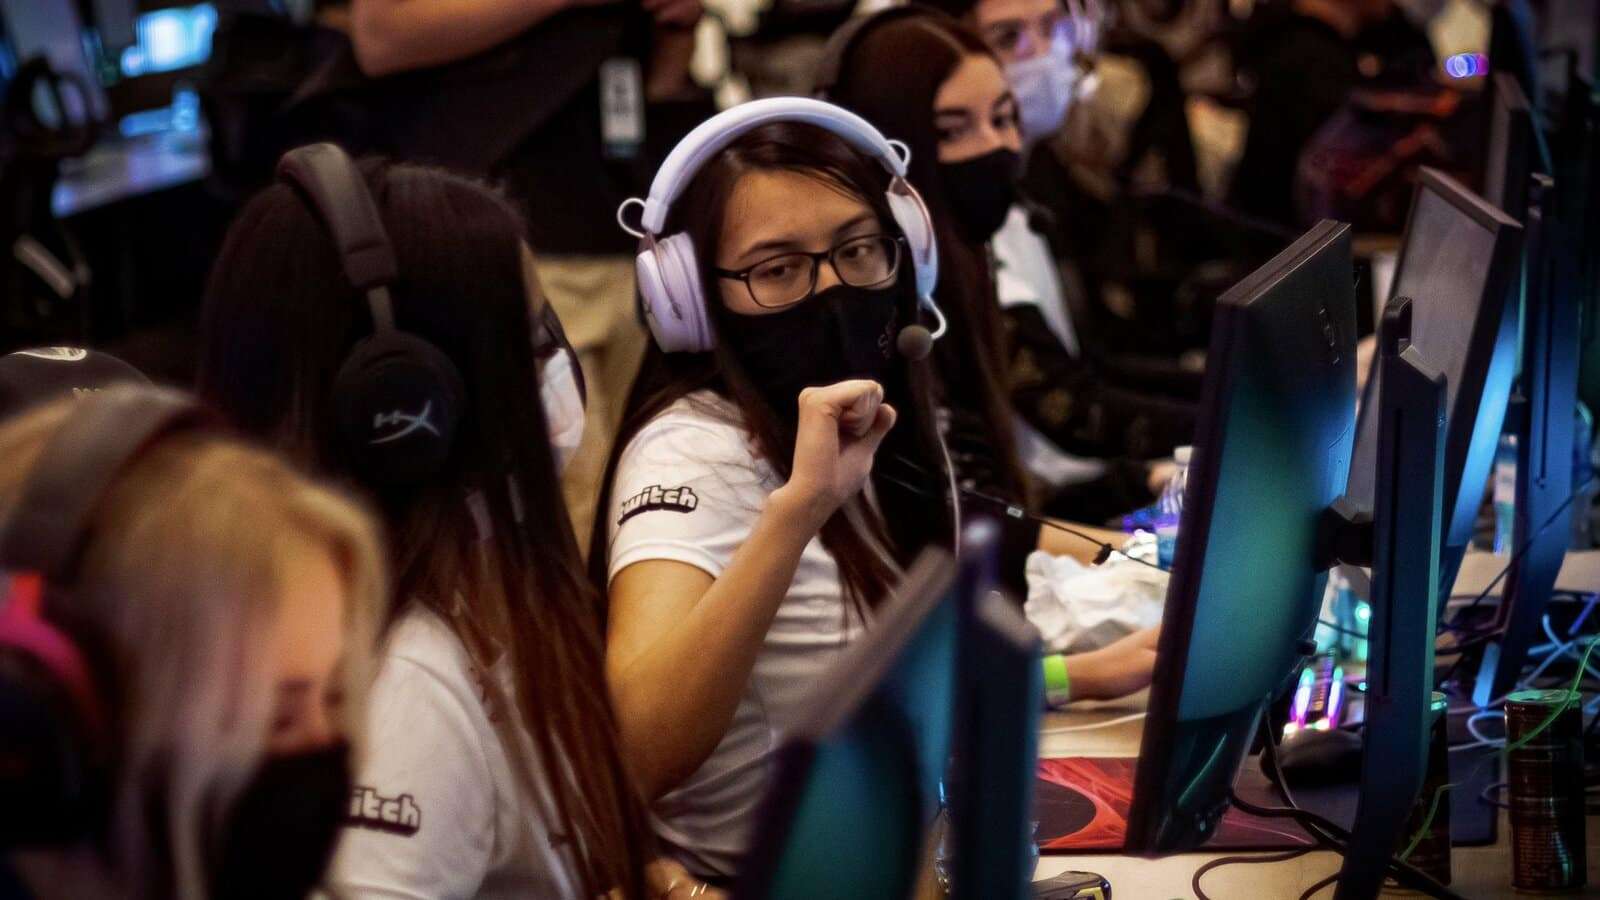 MeL fist bumps her teammates at a LAN tournament wearing a C9 jersey and black mask